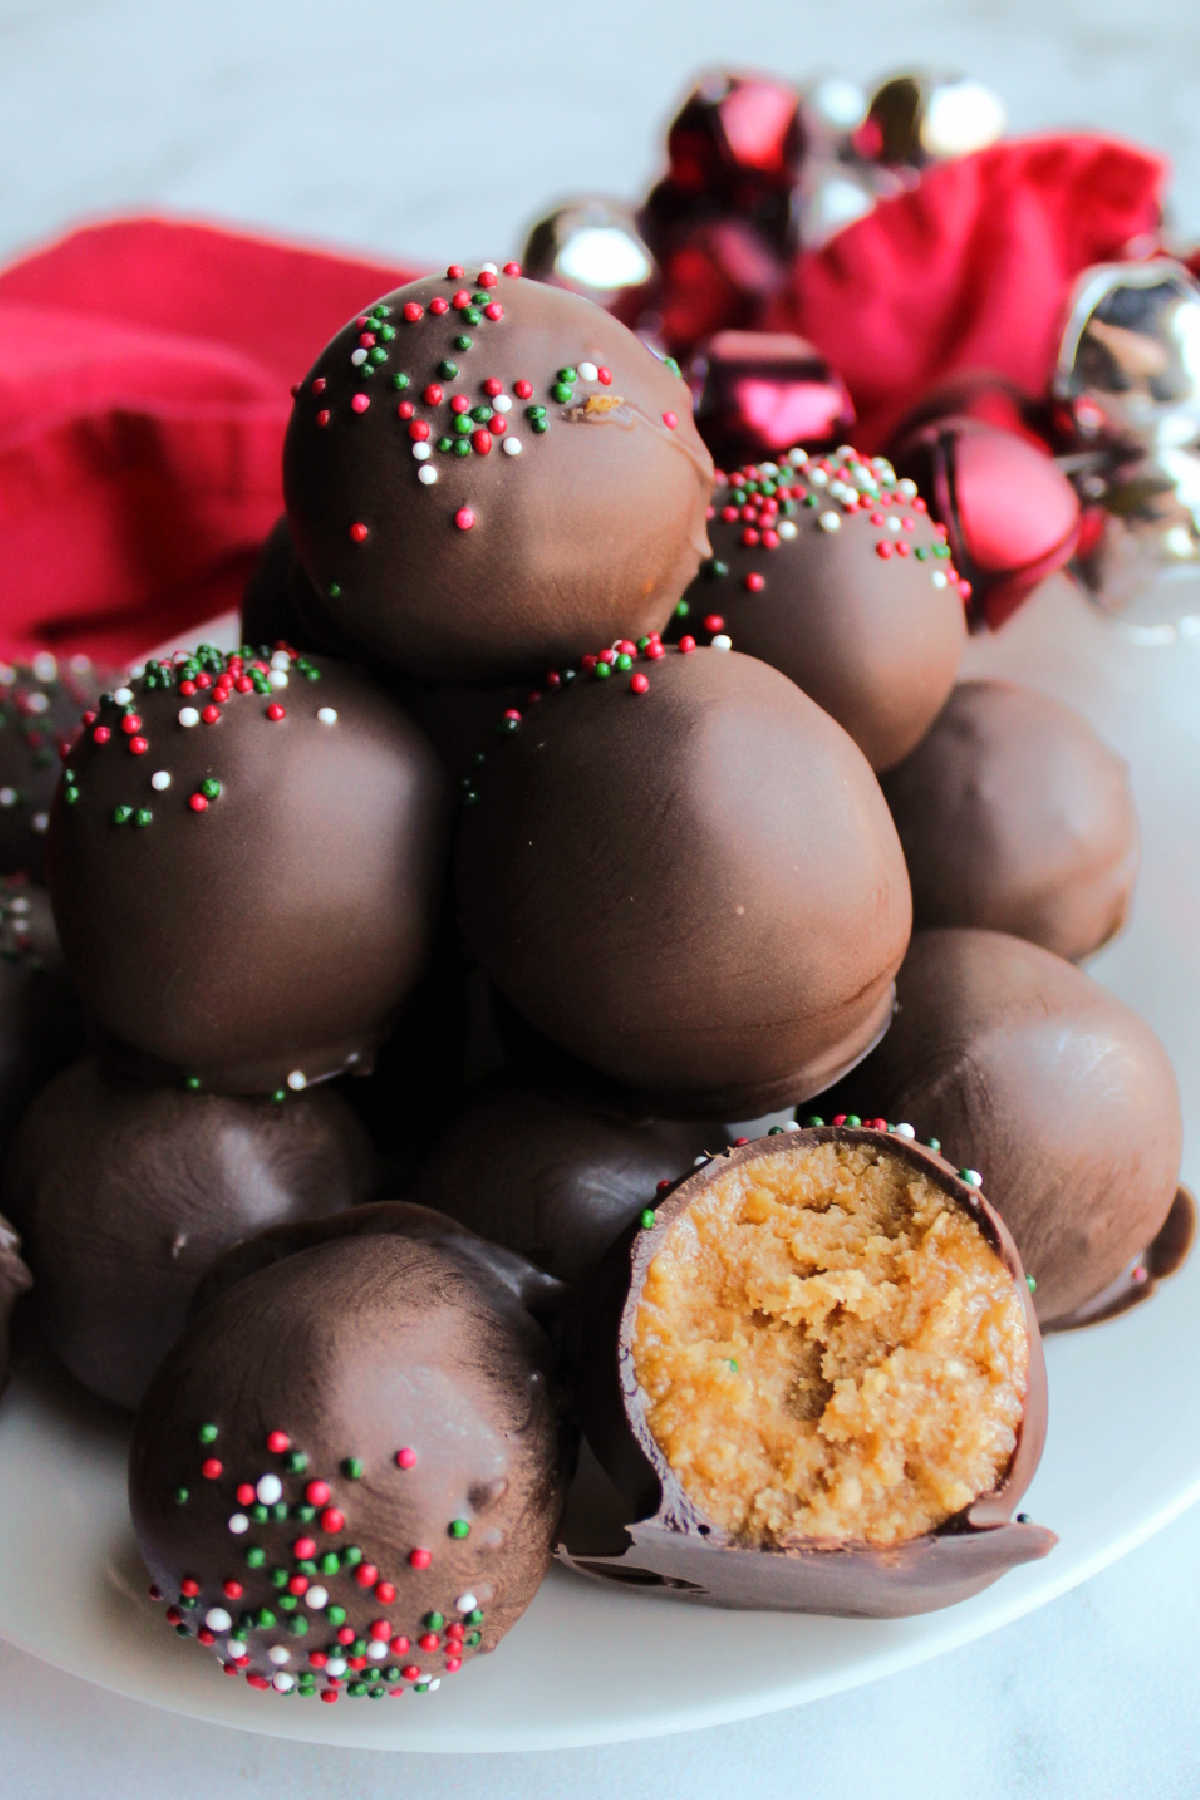 Pile of peanut butter truffles with one cut open to show the peanut butter center.